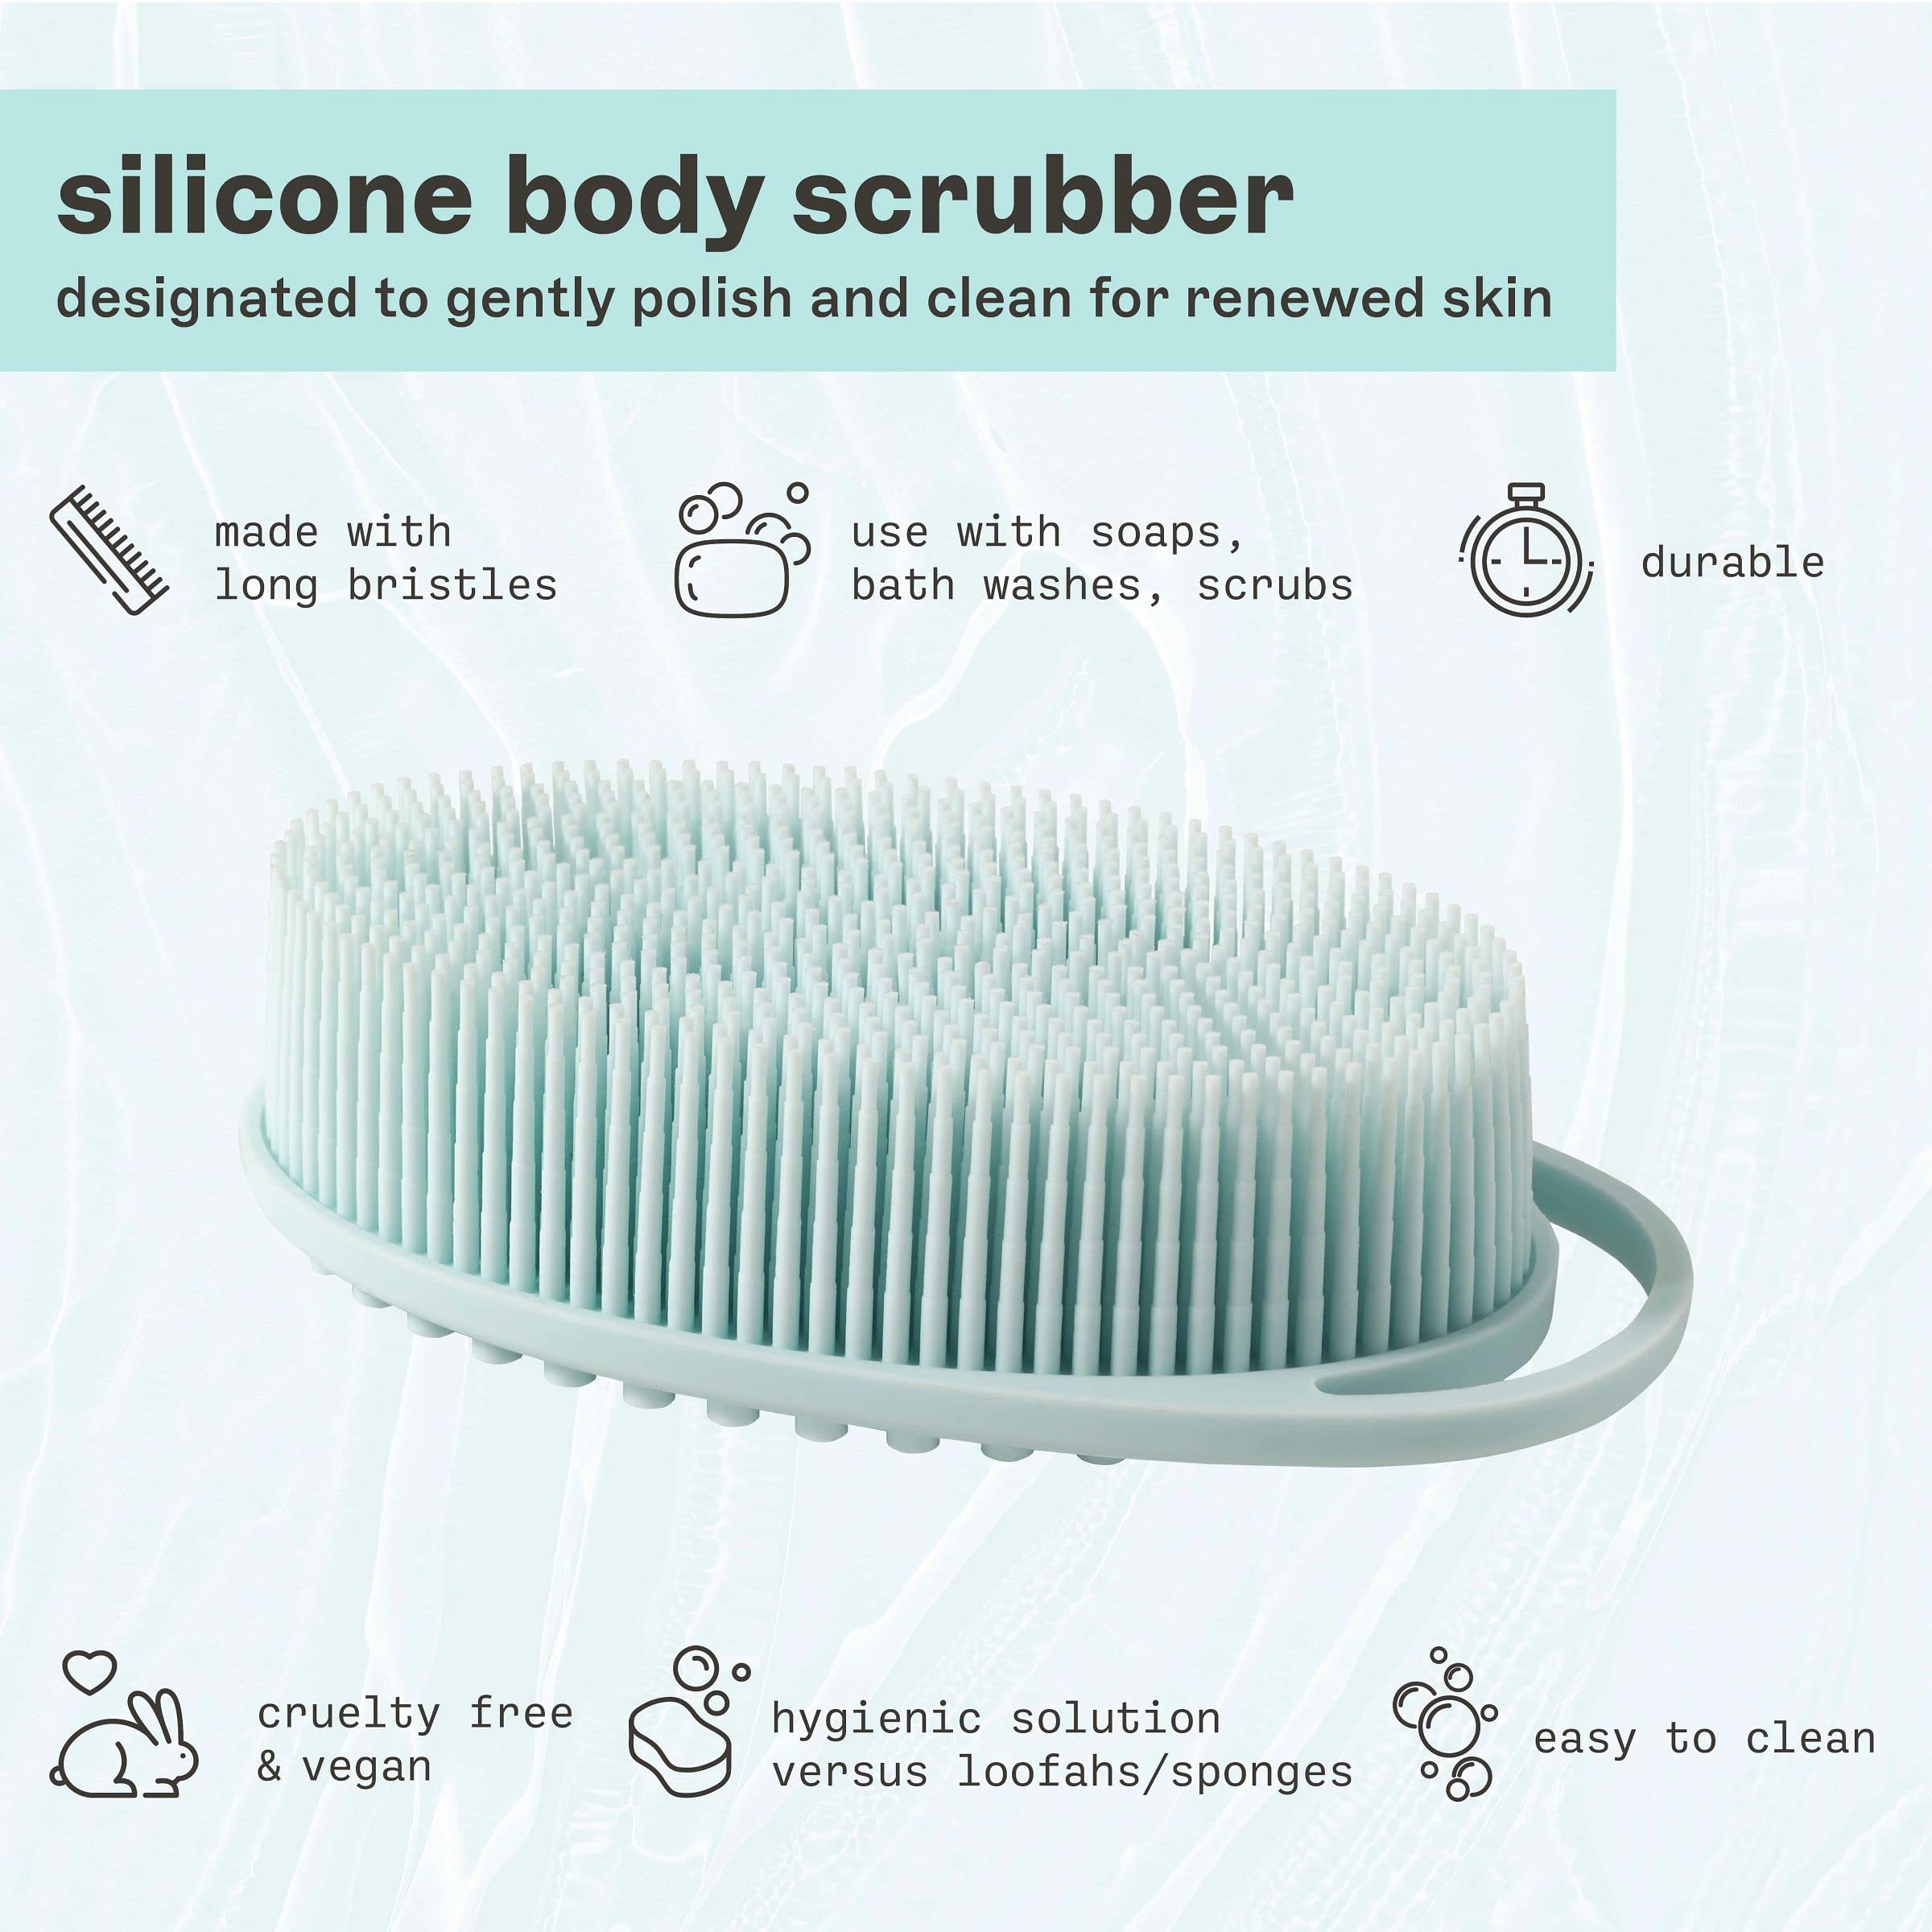 Freeman Premium Exfoliating Silicone Body Scrubber, Easy to Use, Long Lasting, Deep Cleansing On Skin, Better Than Loofahs, Perfect for Men & Women, Hygienic, Cruelty Free & Vegan, 1 Count